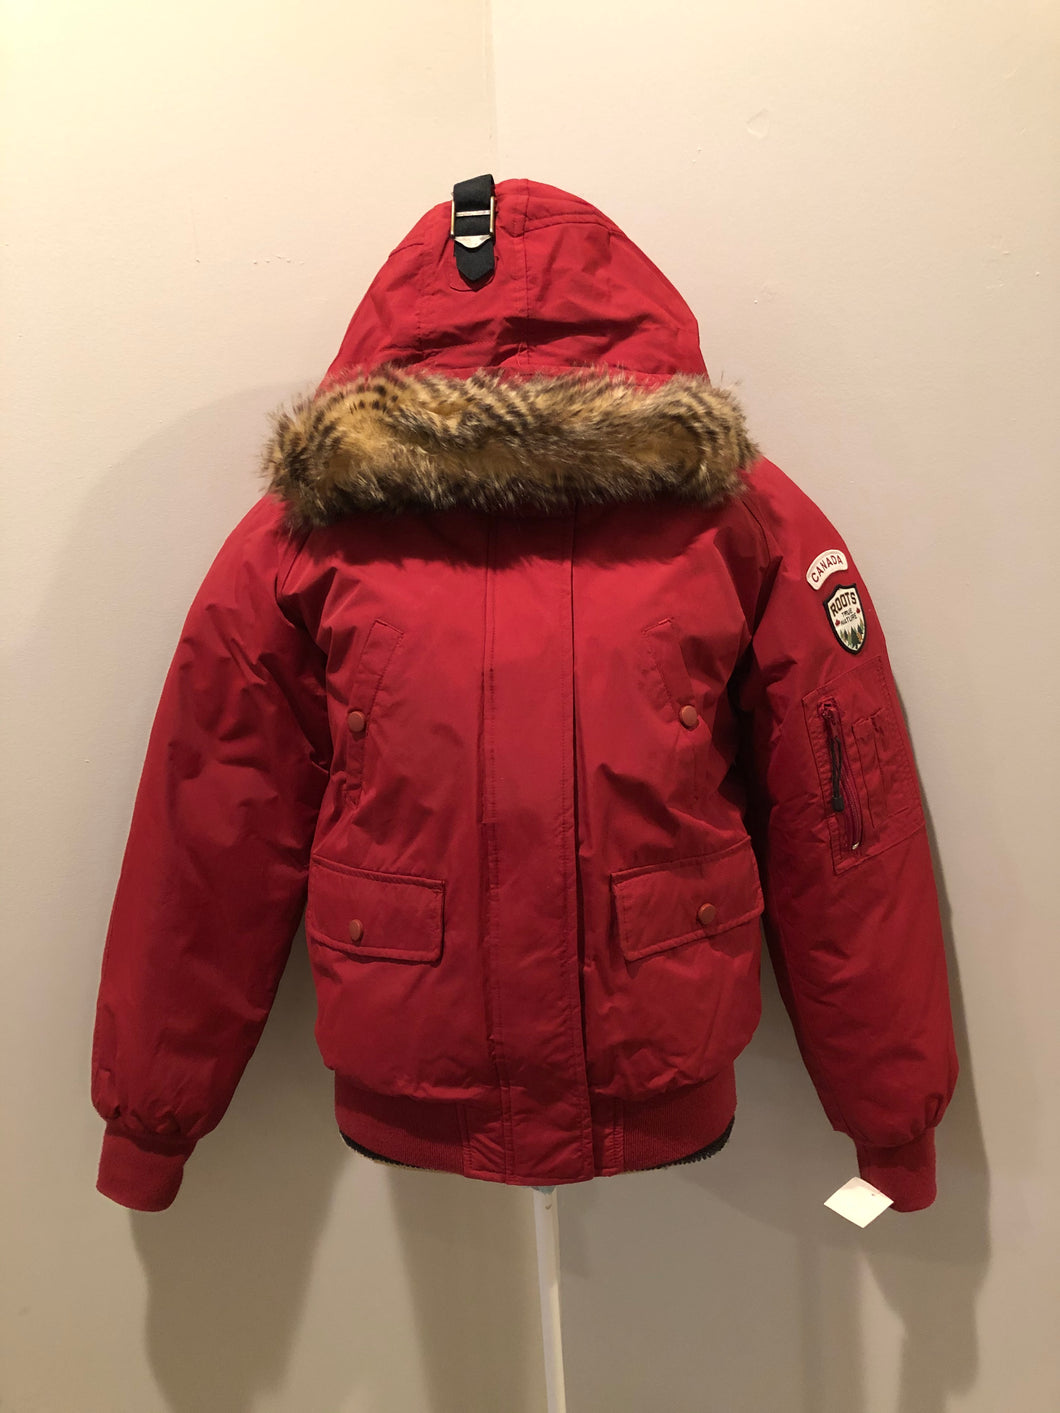 Kingspier Vintage - Roots down-filled bomber jacket in red with faux fur trimmed hood, zipper closure, flap pockets and slash pockets, “Stay Warm Eh” written on the inside pocket. Size medium.